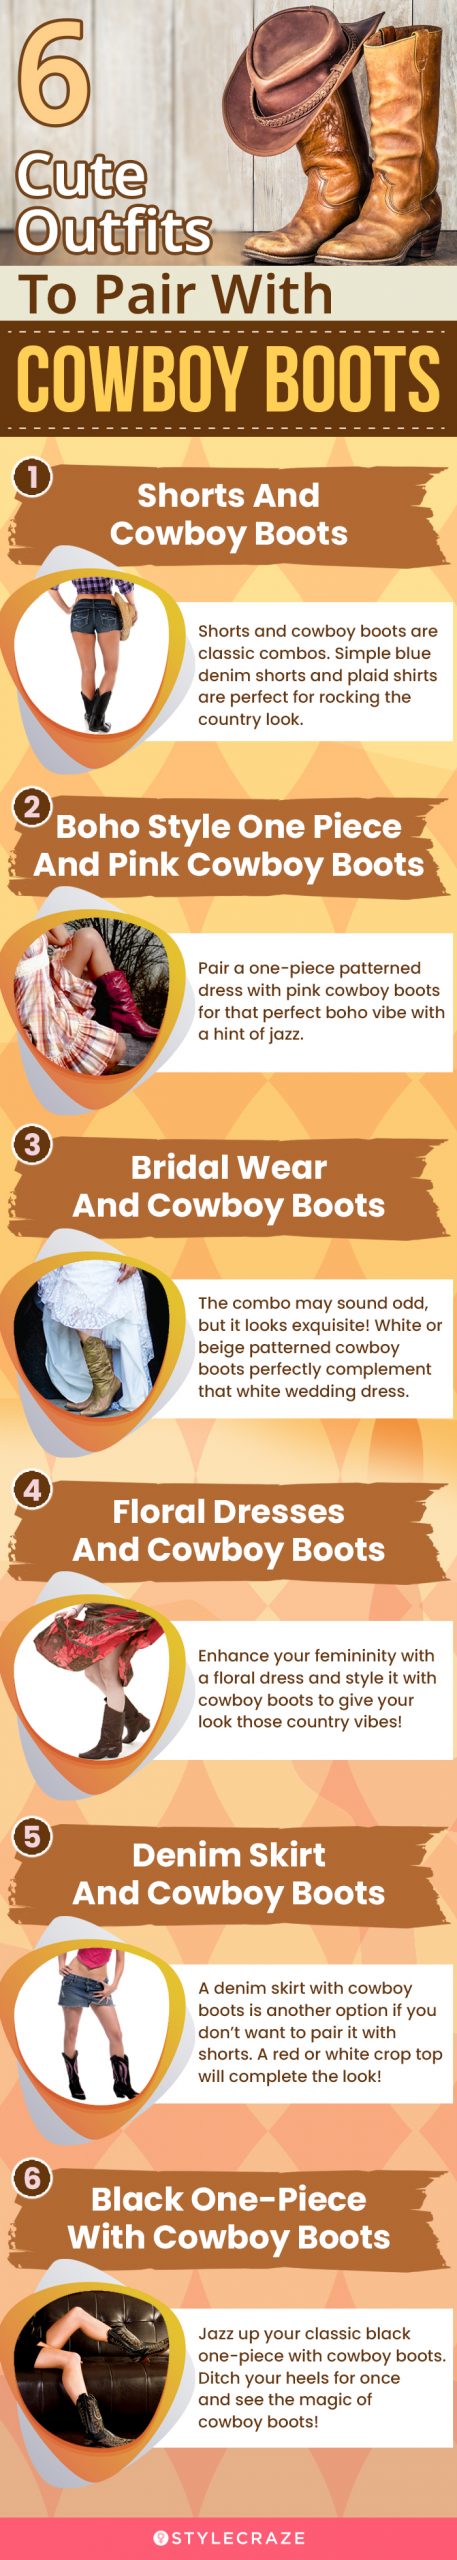 6 cute outfits to pair with cowboy boots (infographic)